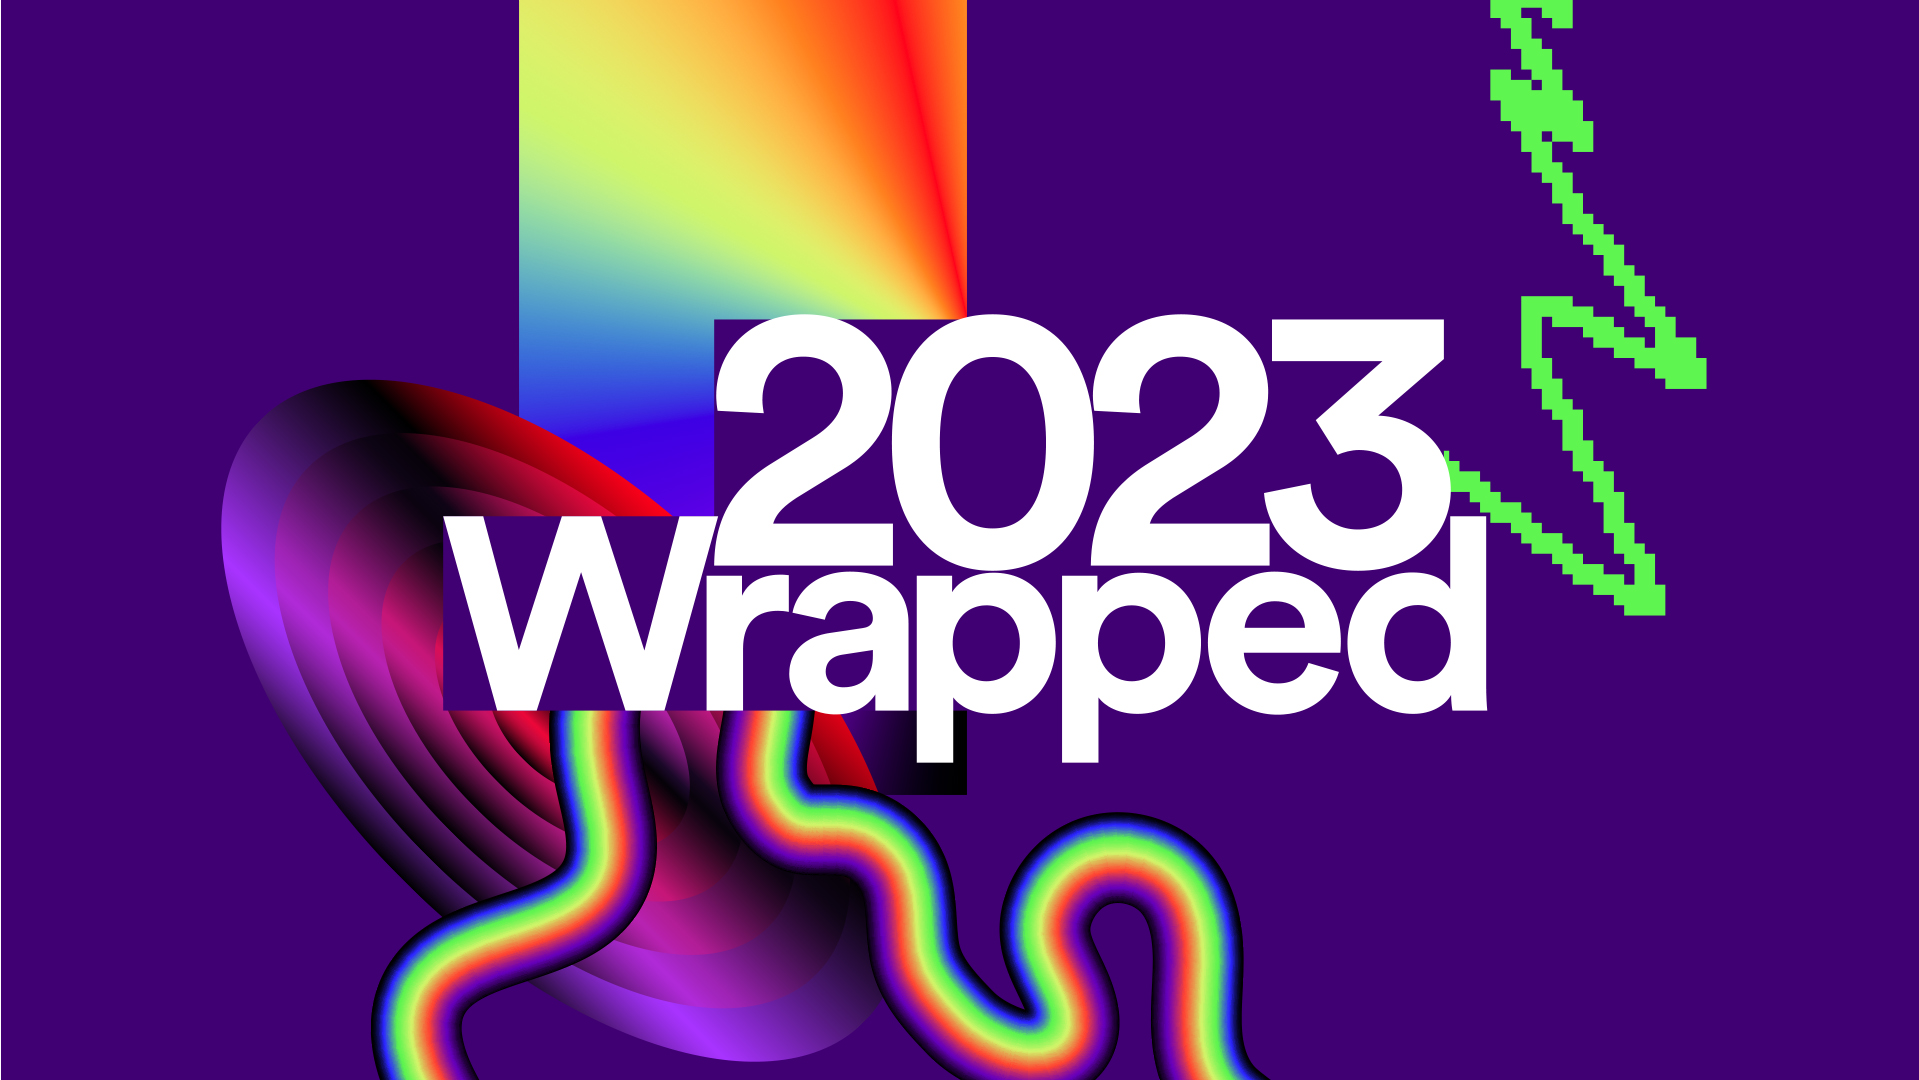 Spotify Unveils It's 2023 Wrapped Campaign